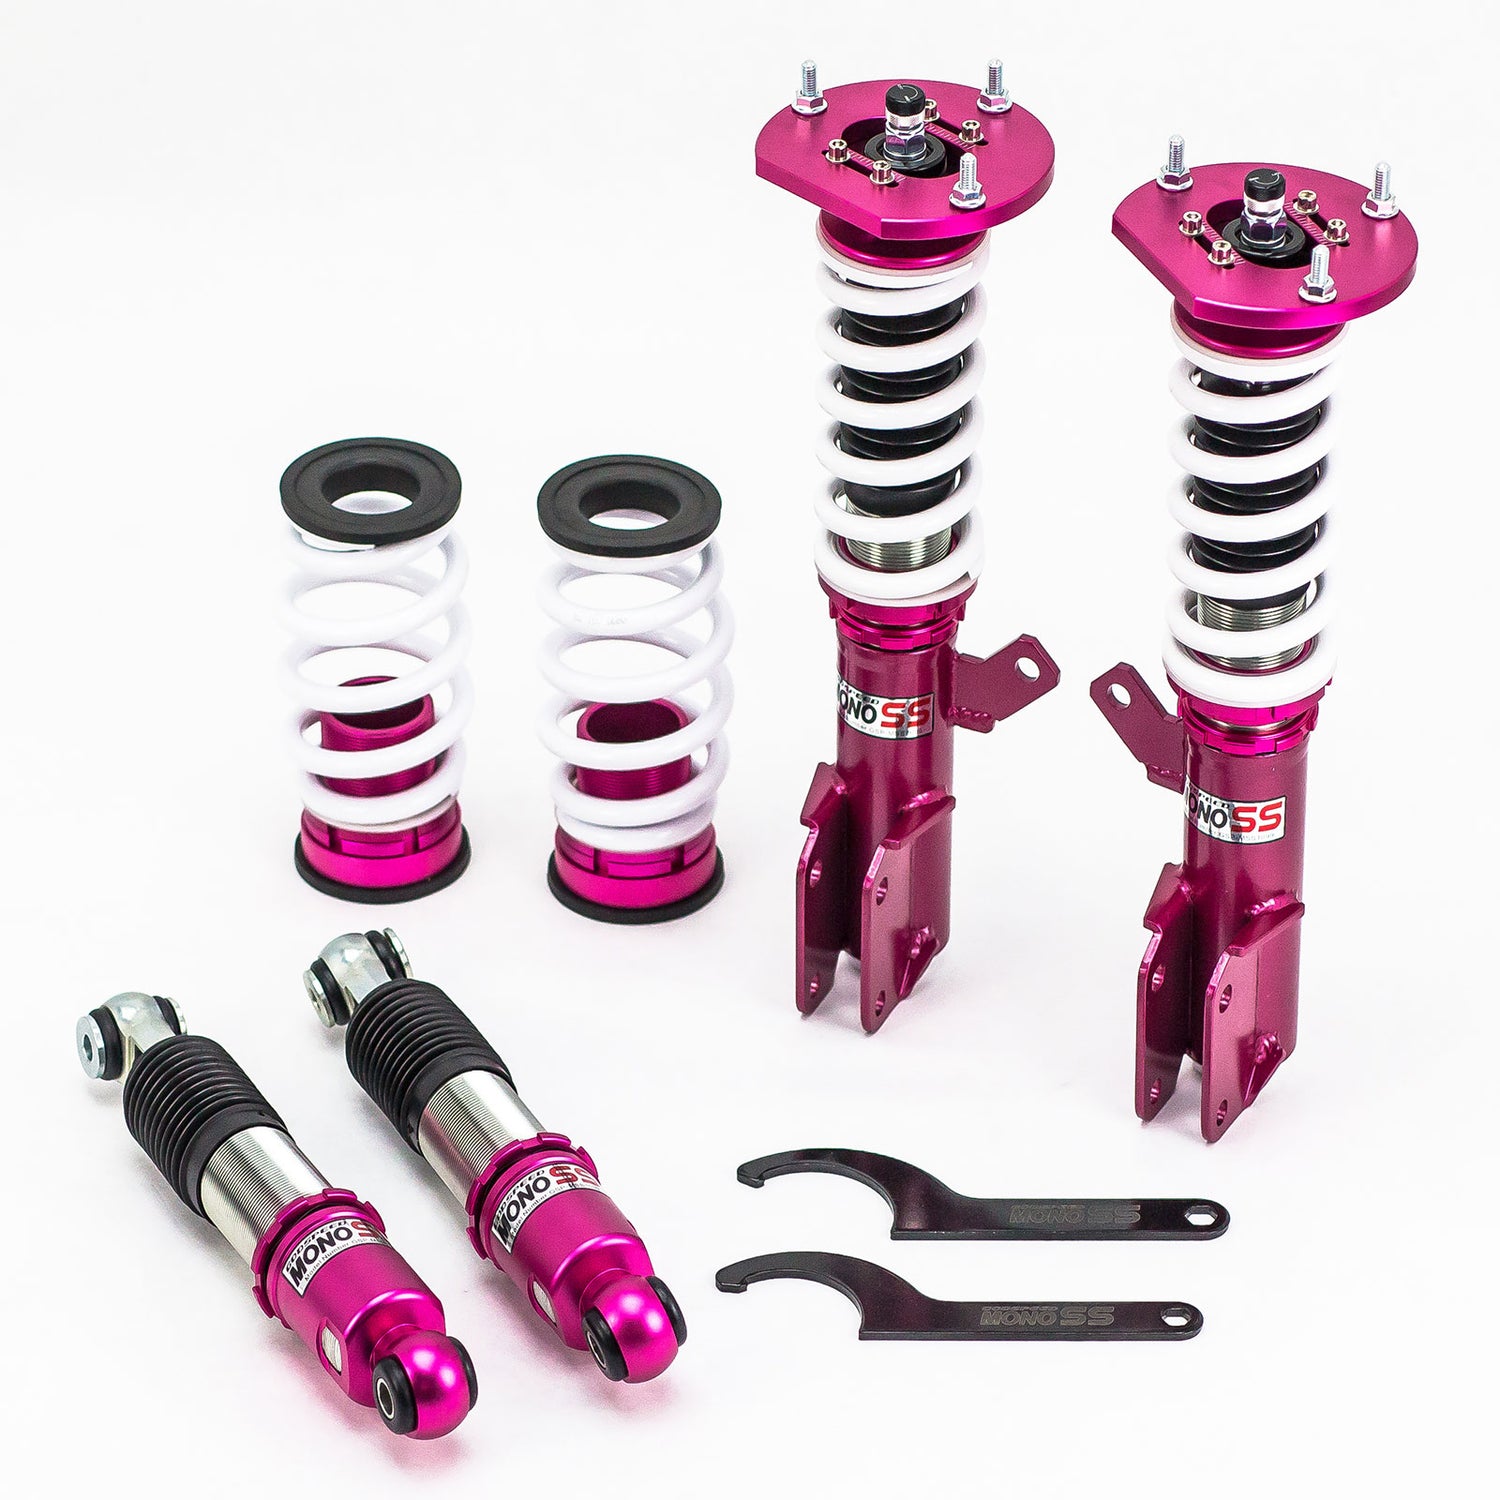 Godspeed MSS1099-B MonoSS Coilover Lowering Kit, Fully Adjustable, Ride Height, Spring Tension And 16 Click Damping, Pontiac G5 2007-09